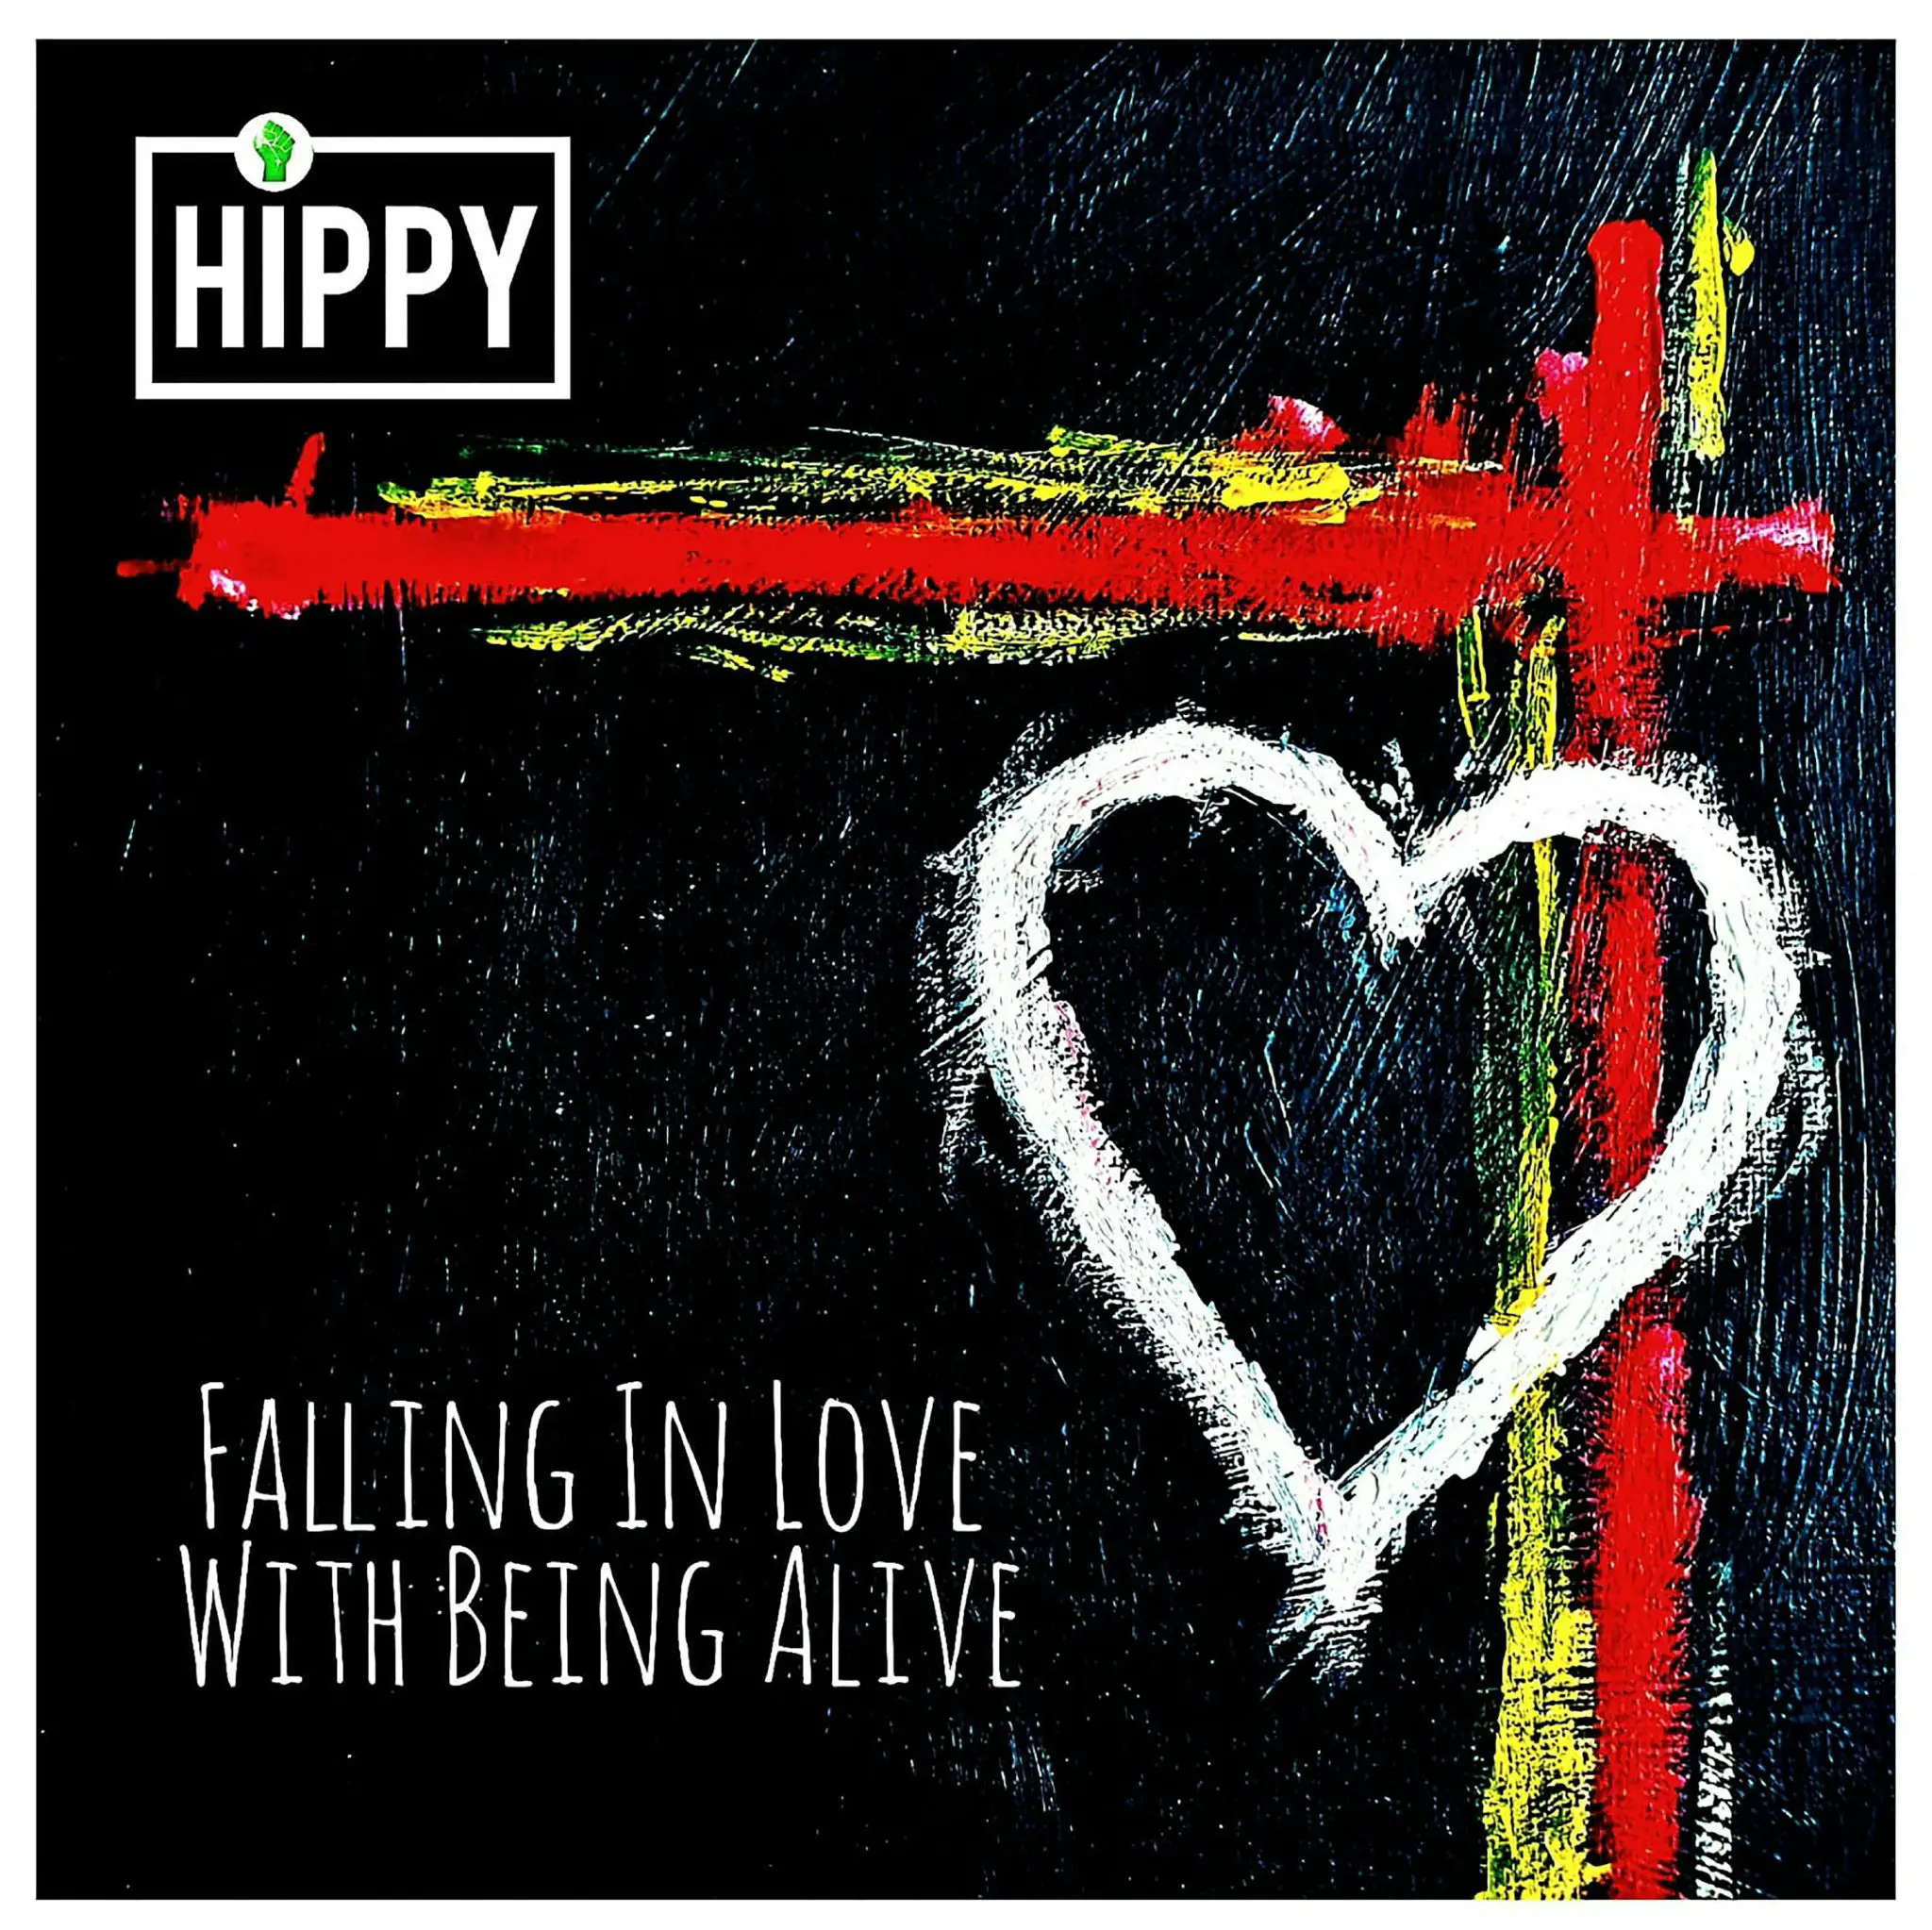 Hippy - 'Falling In Love With Being Alive' Reaction | Opinions | LIVING LIFE FEARLESS